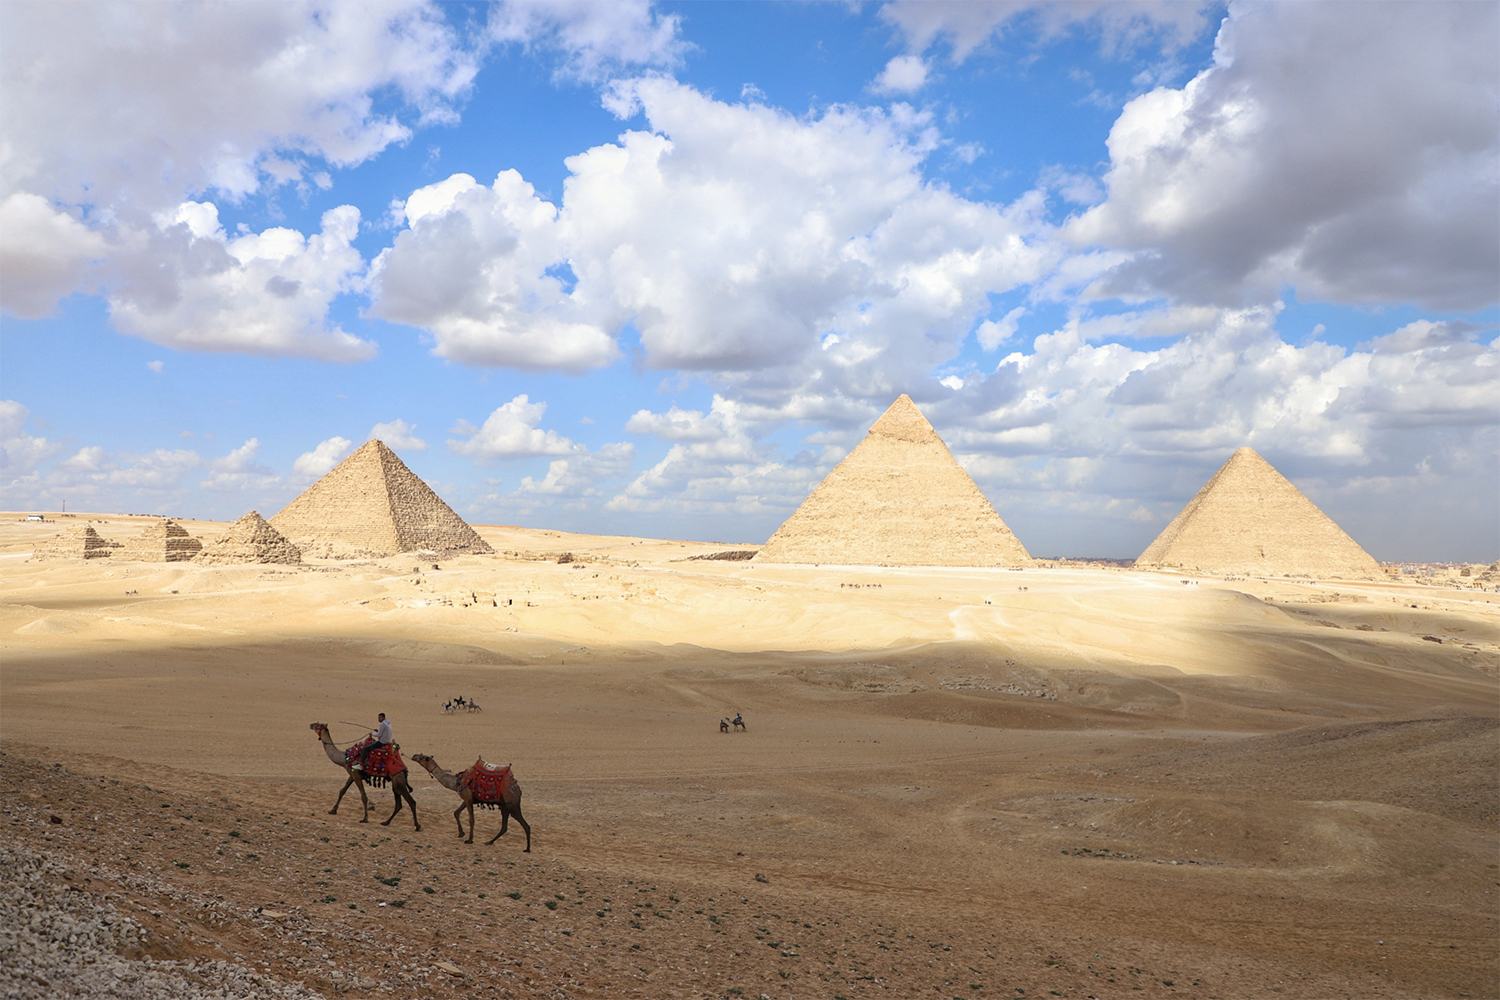 A man riding a camel and leading another animal in front of the Giza pyramid comlpex